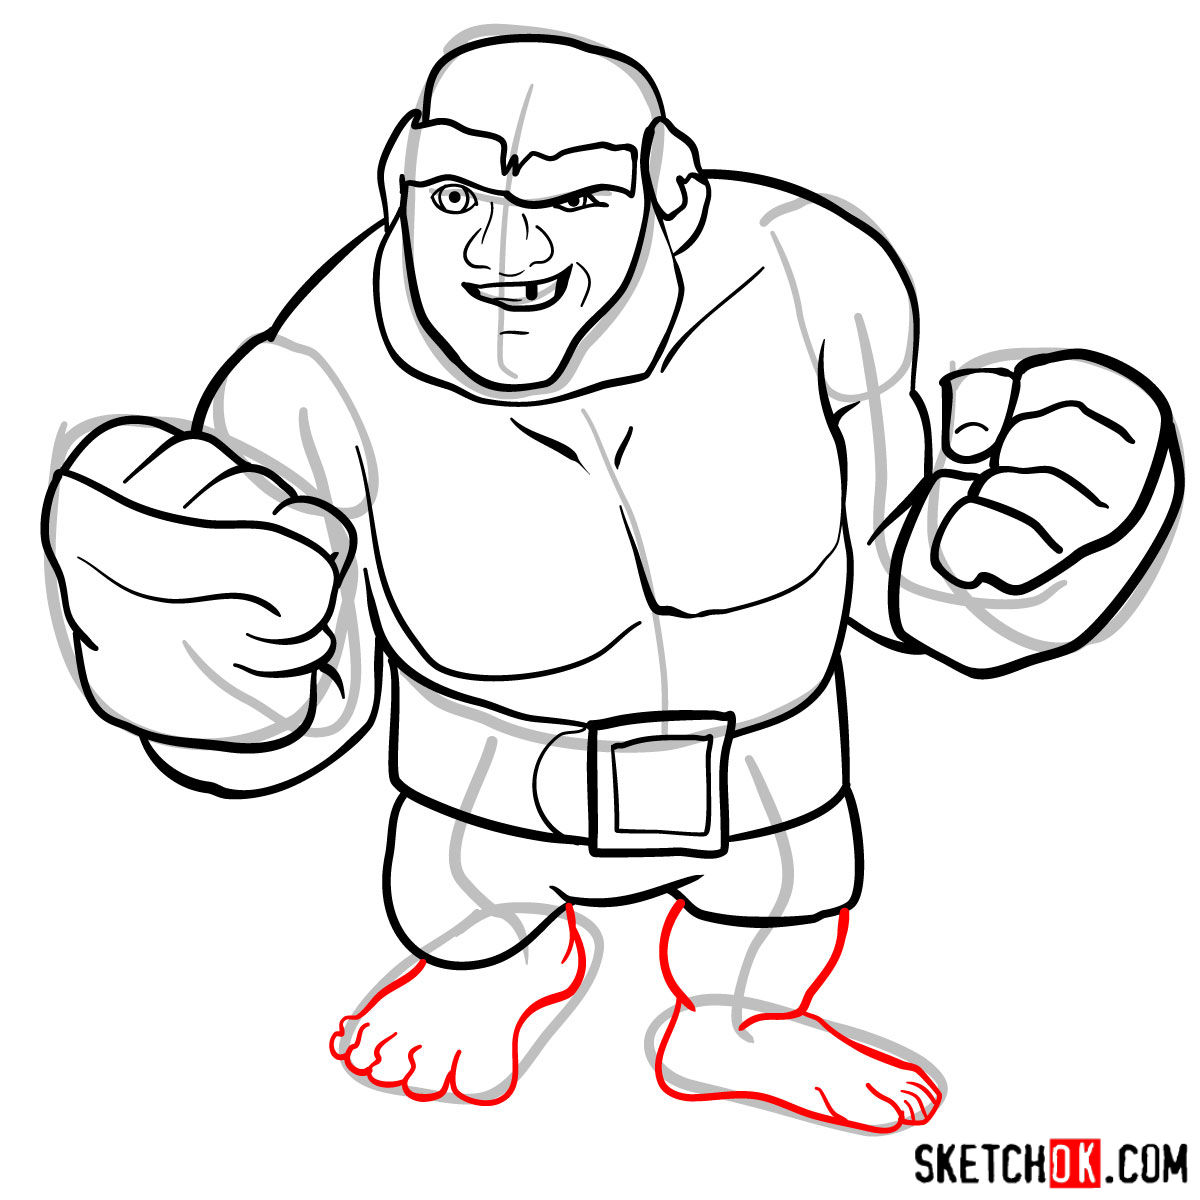 How to draw Boxer Giant from Clash of Clans - step 10